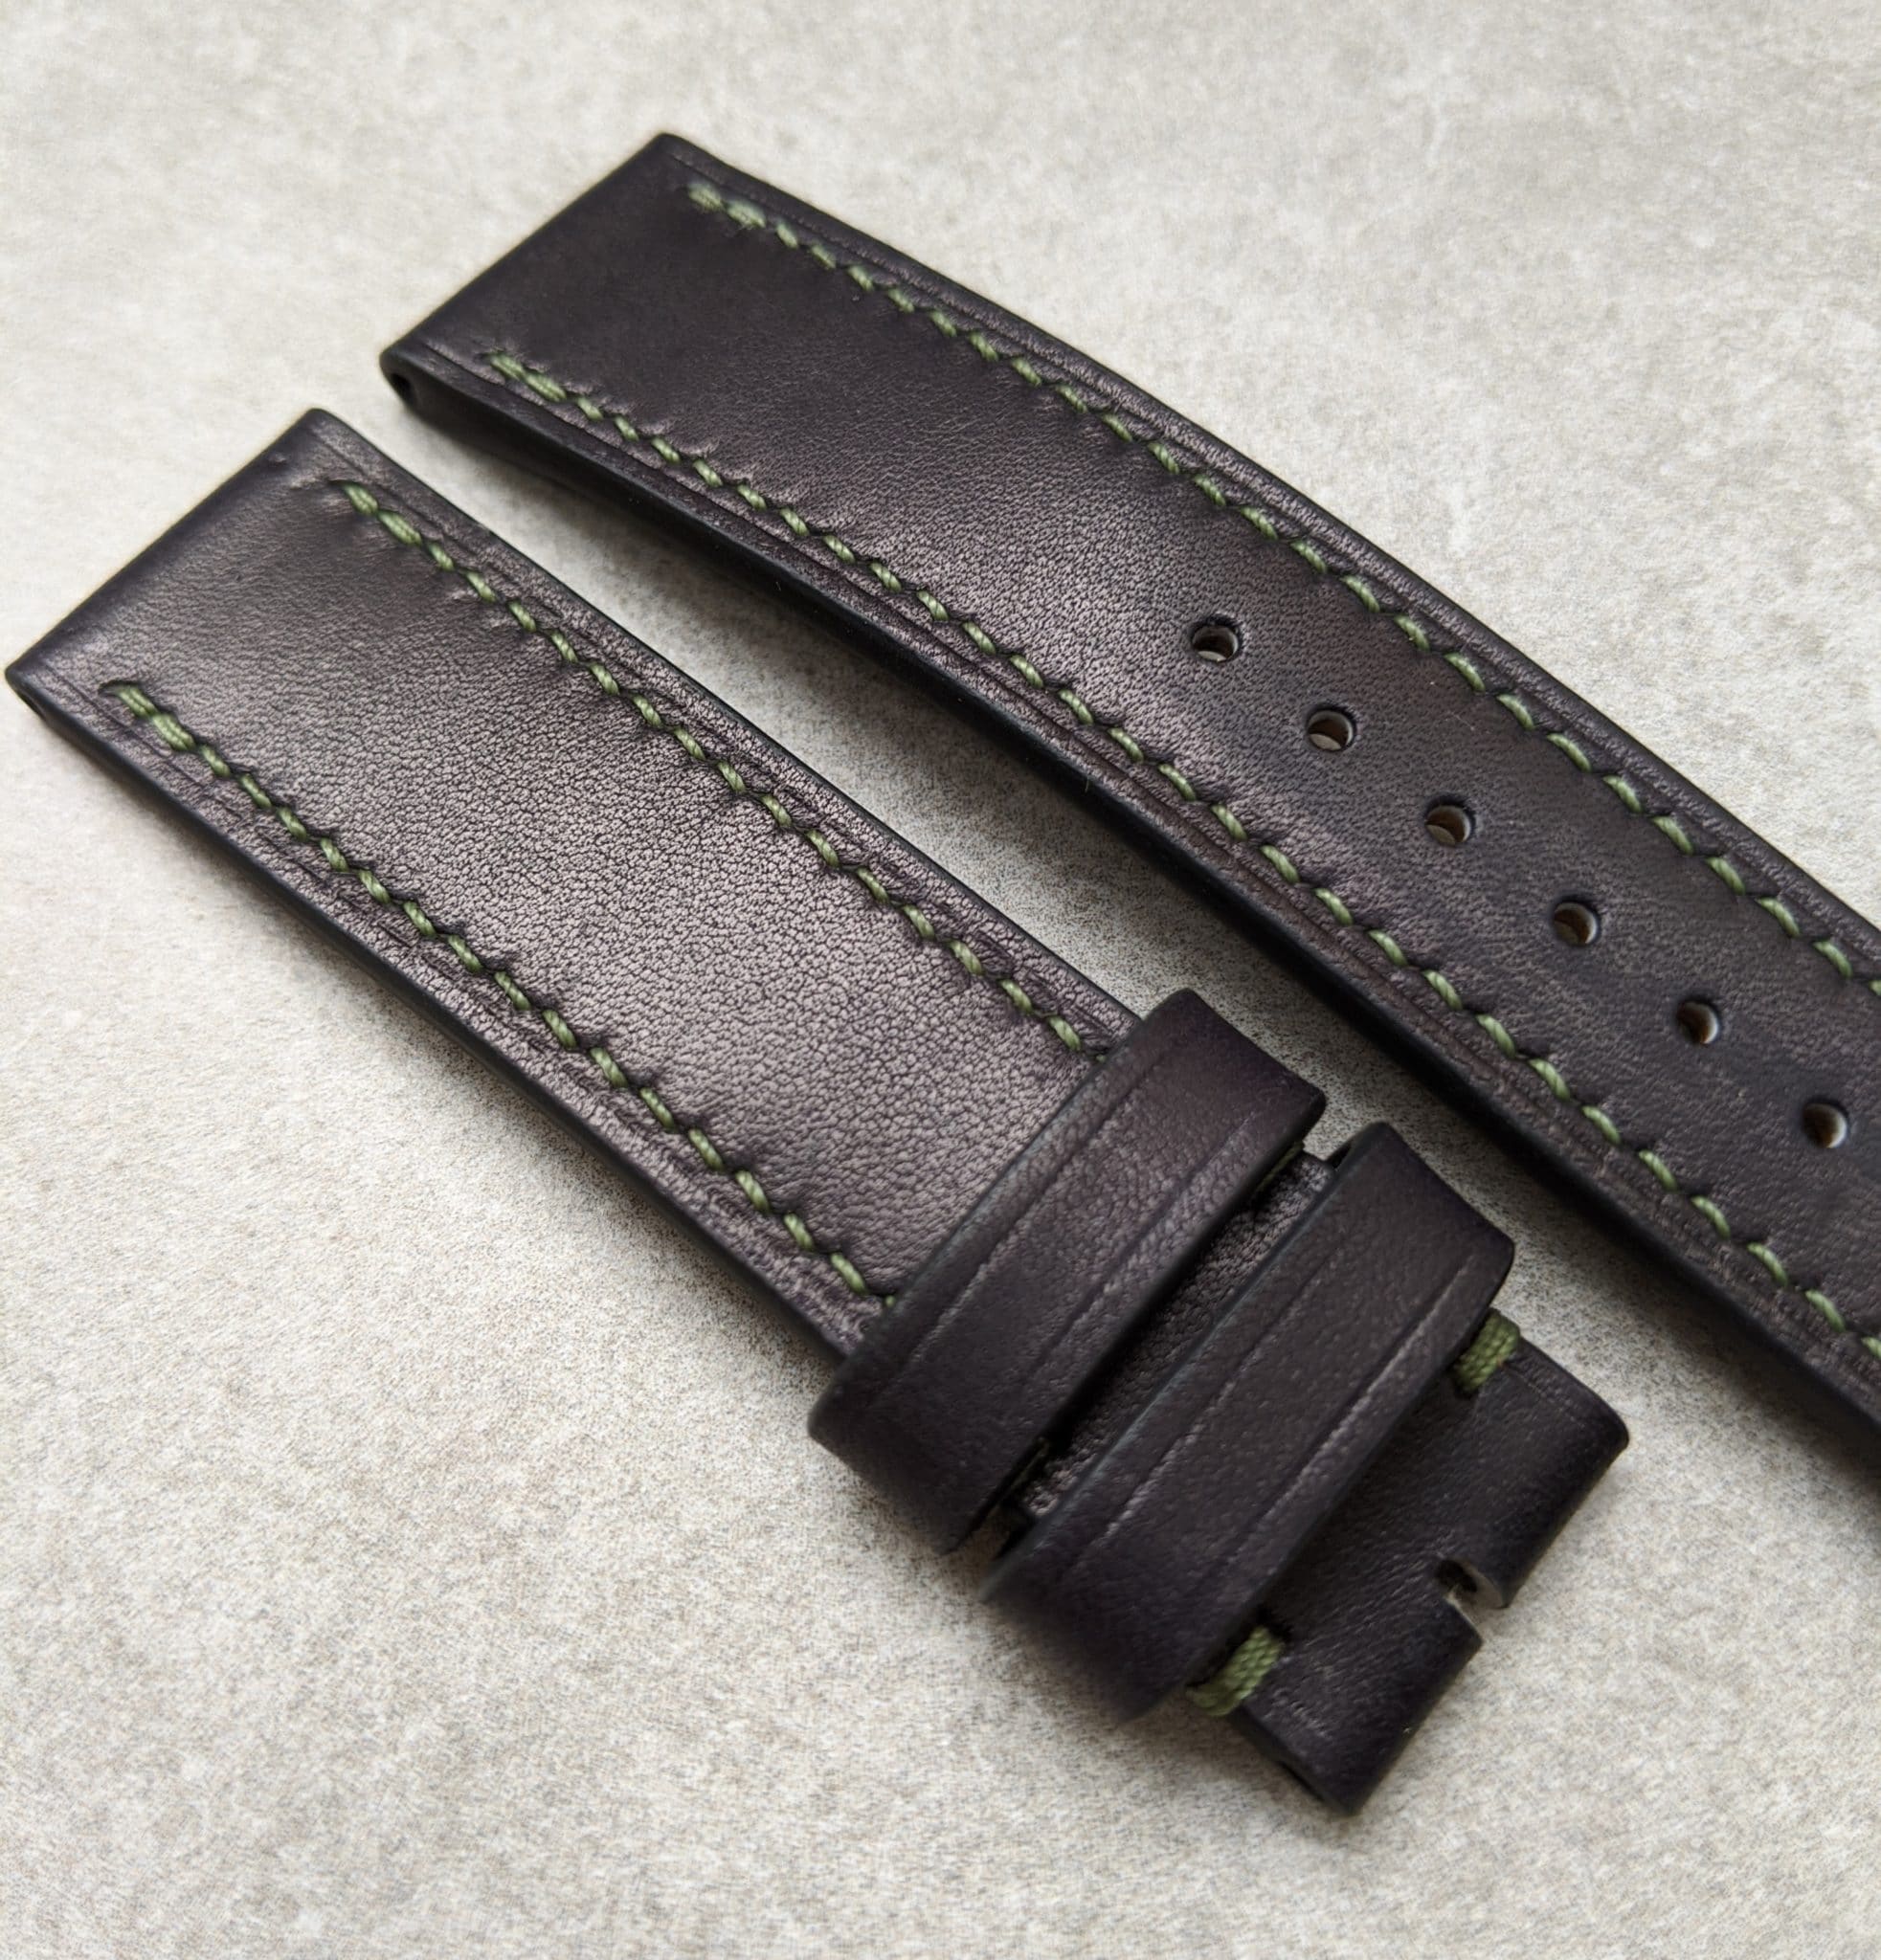 French Calfskin Watch Strap - Black & Olive - The Strap Tailor